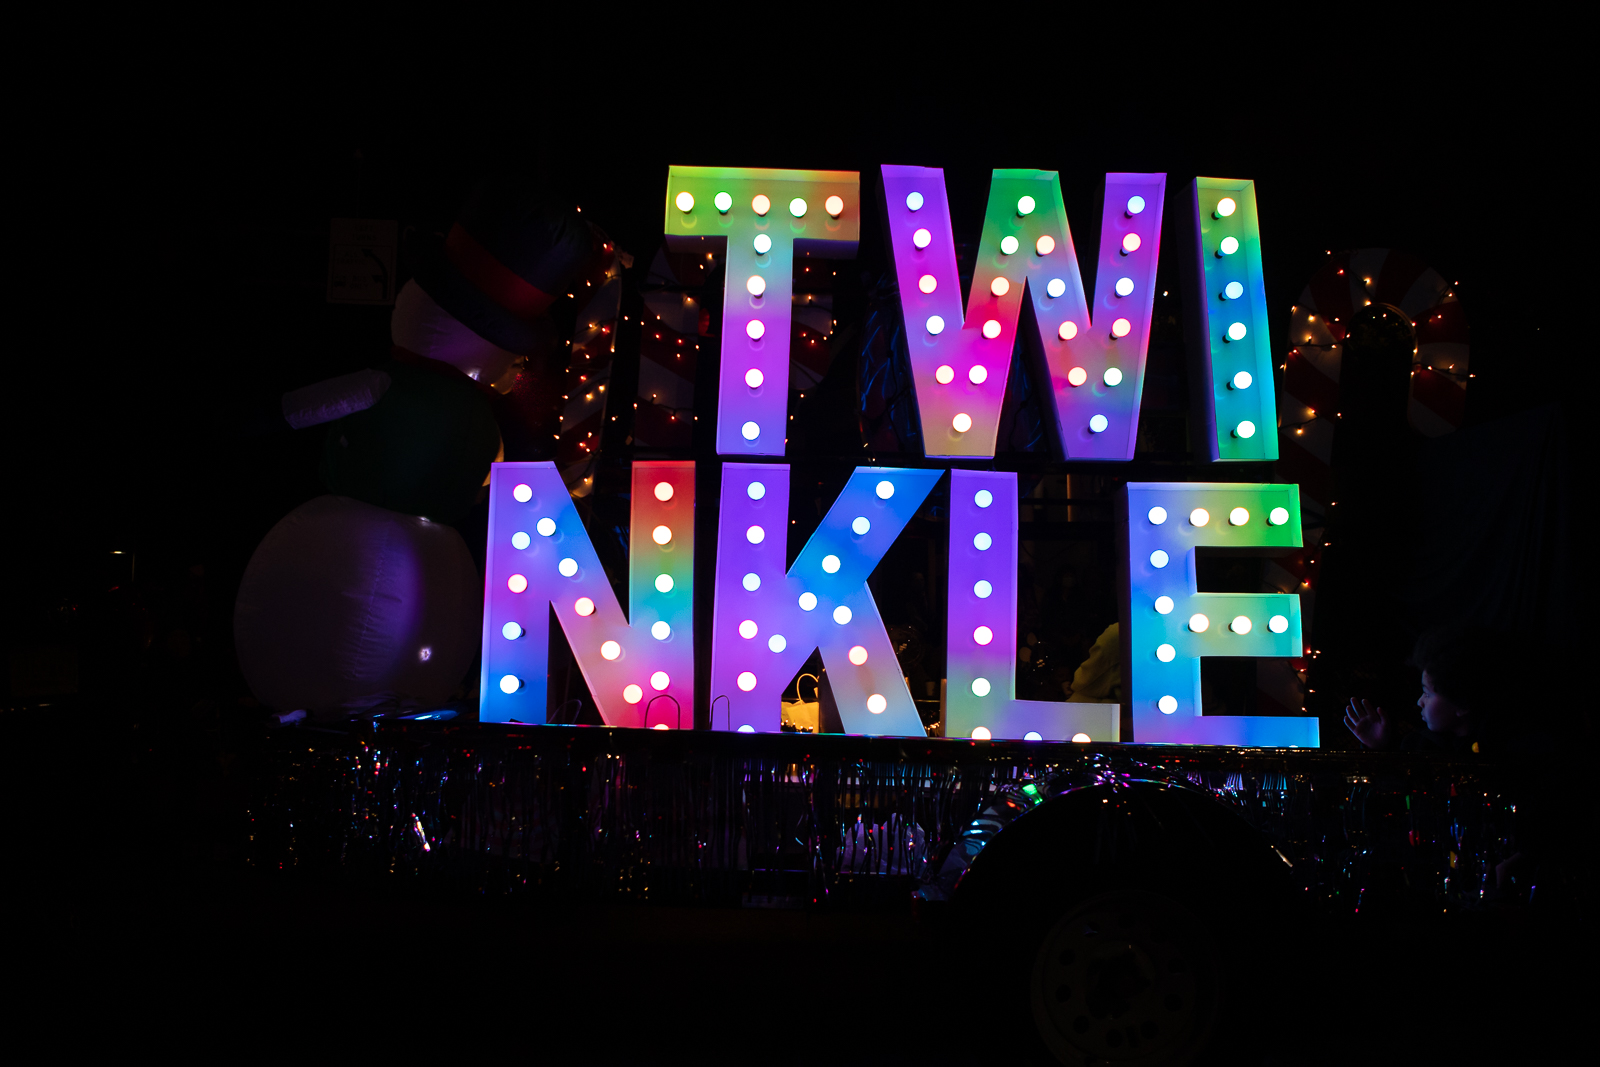 A photo of an entry at the Twinkle Light Parade